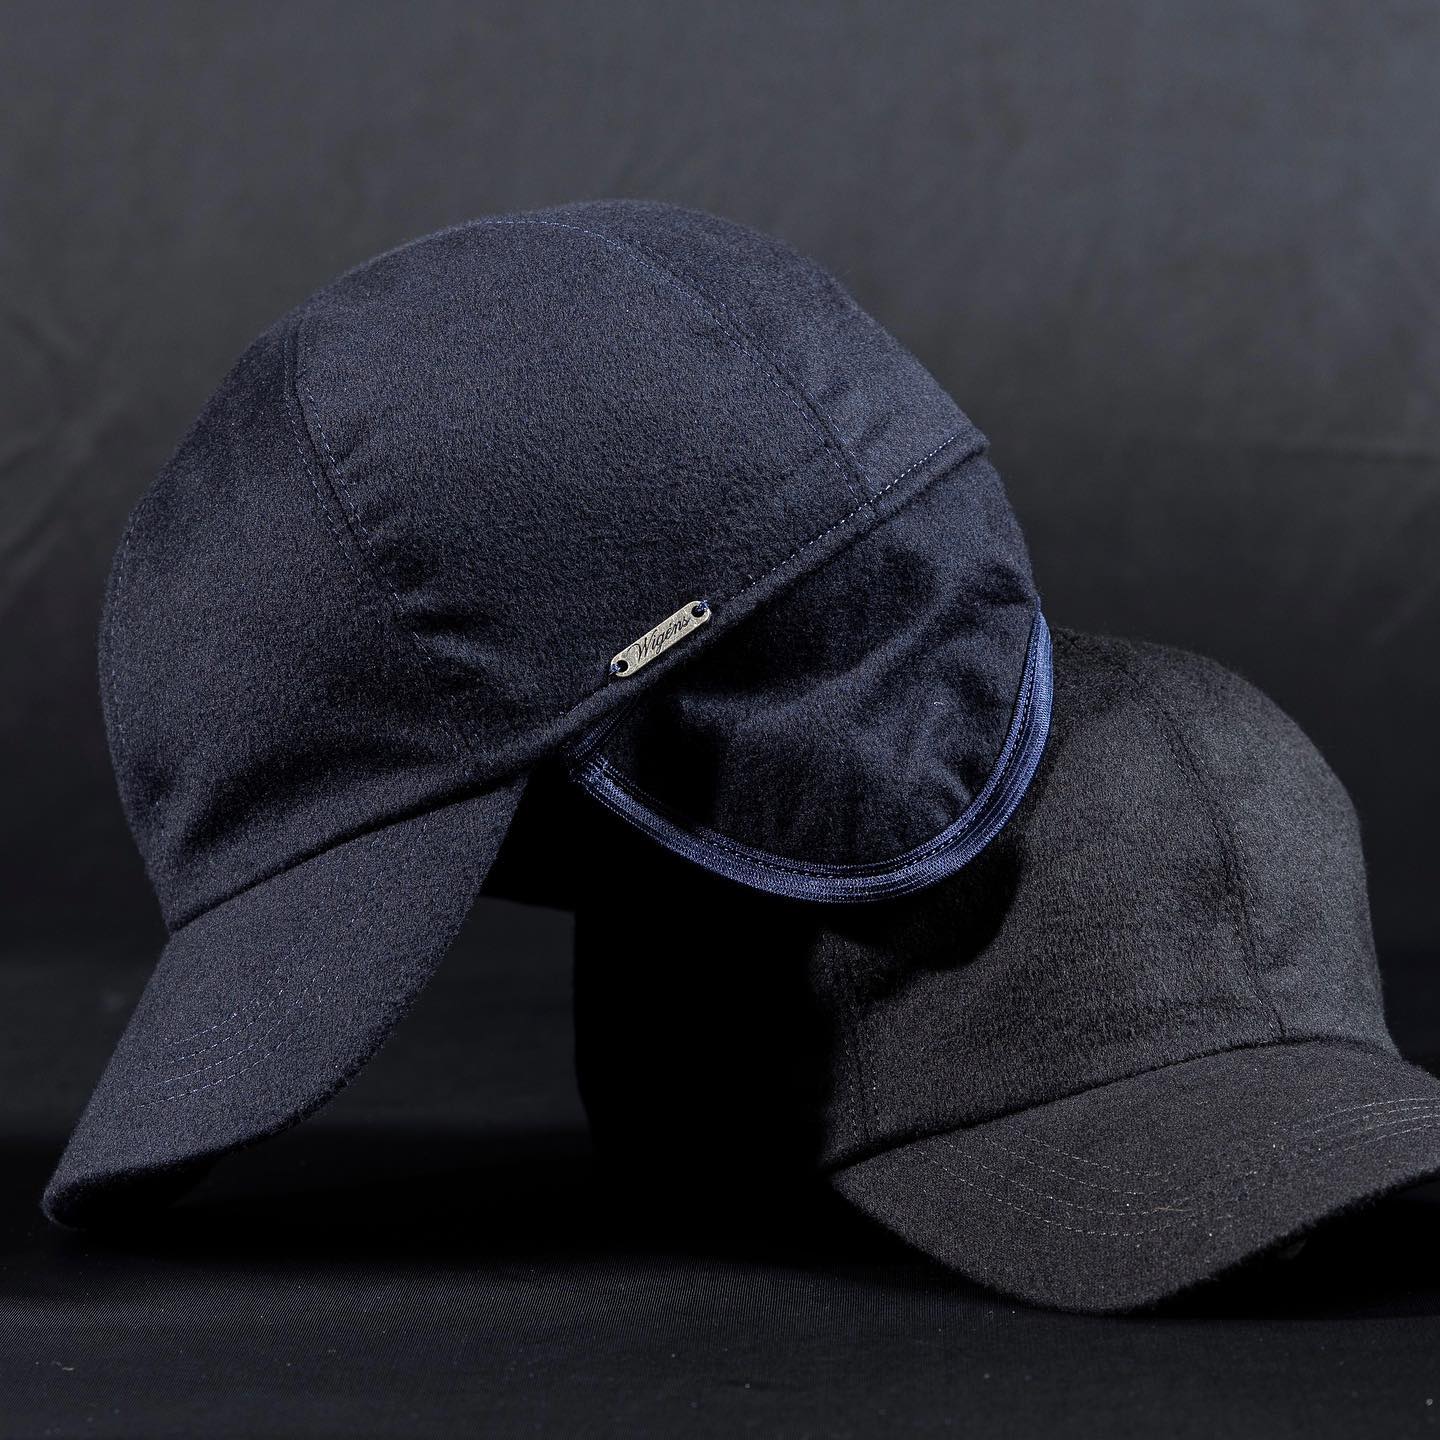 Loro Piana 'Storm System' 100% Cashmere Baseball Classic Cap with Earflaps (Choice of Colors) by Wigens